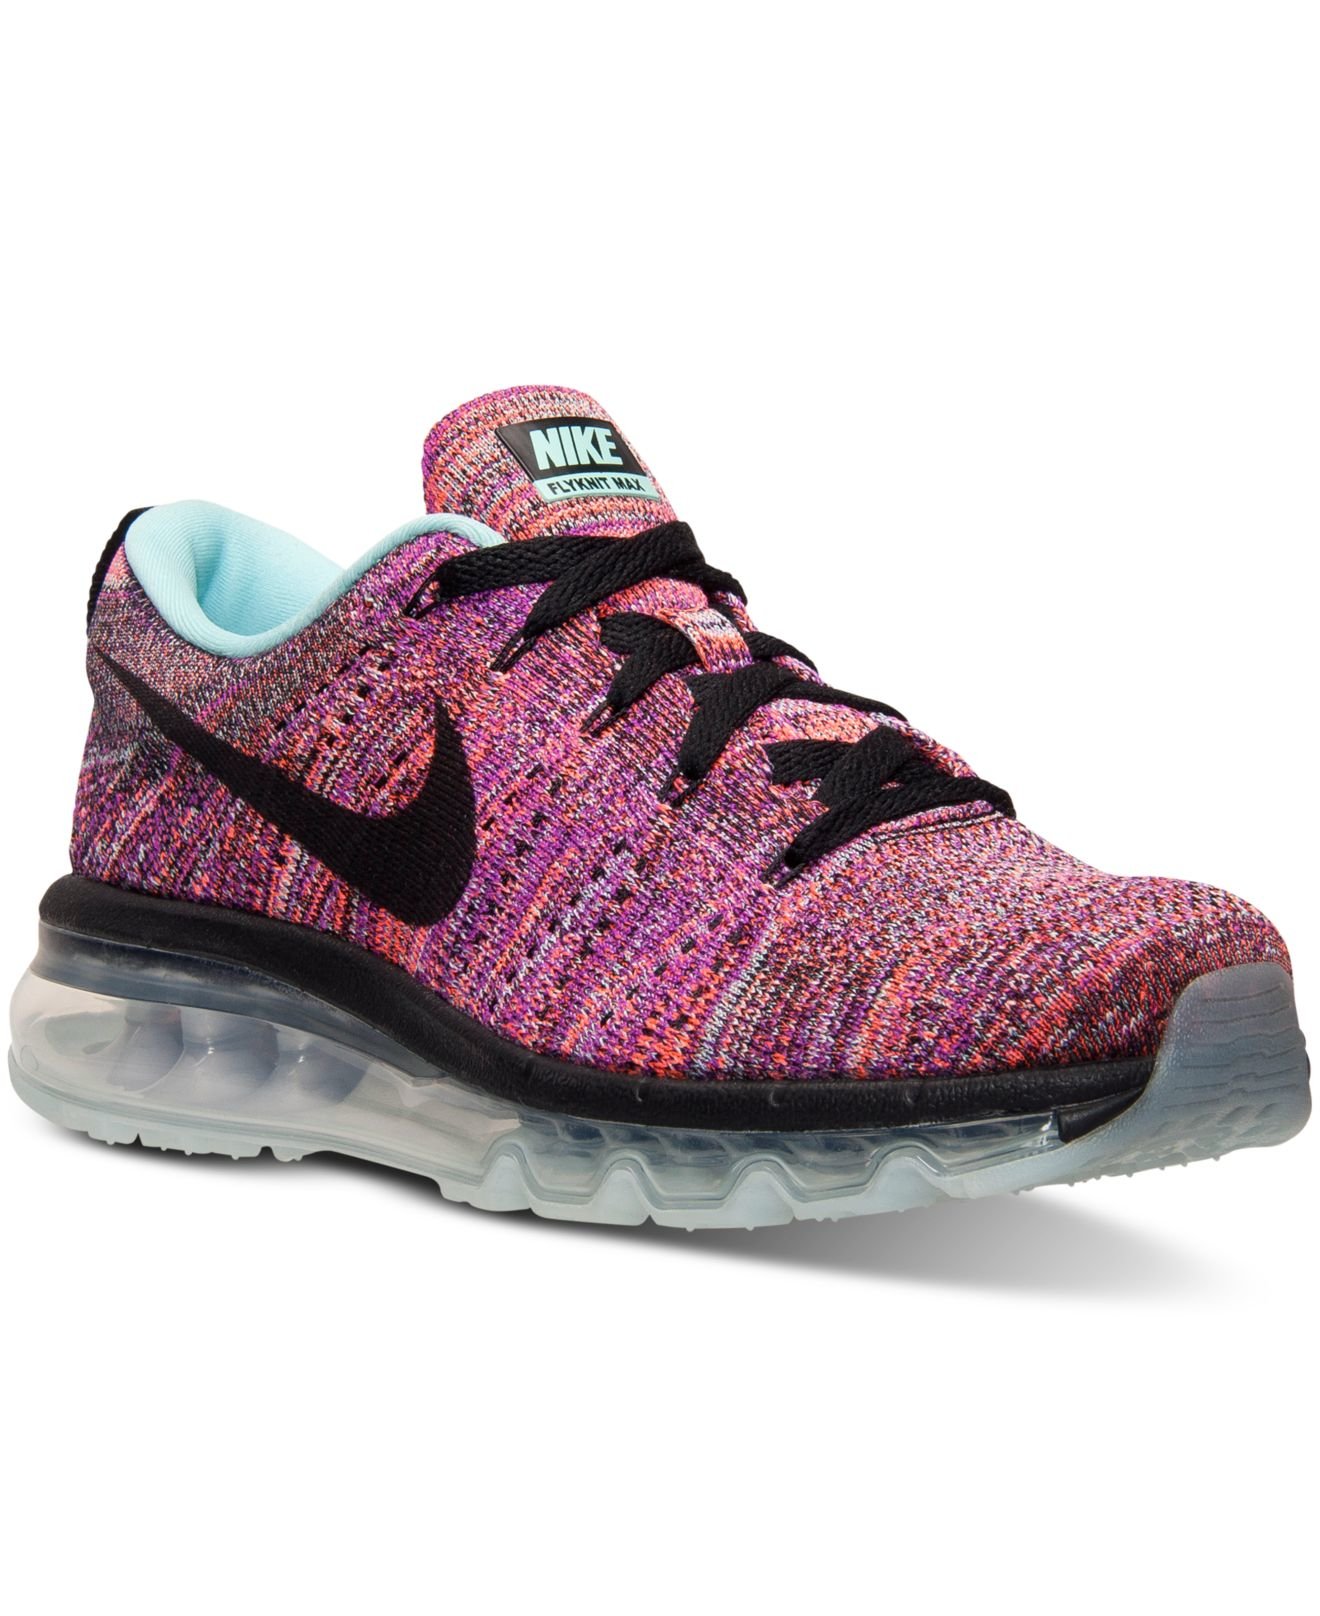 Lyst - Nike Women's Flyknit Air Max Running Sneakers From Finish Line ...